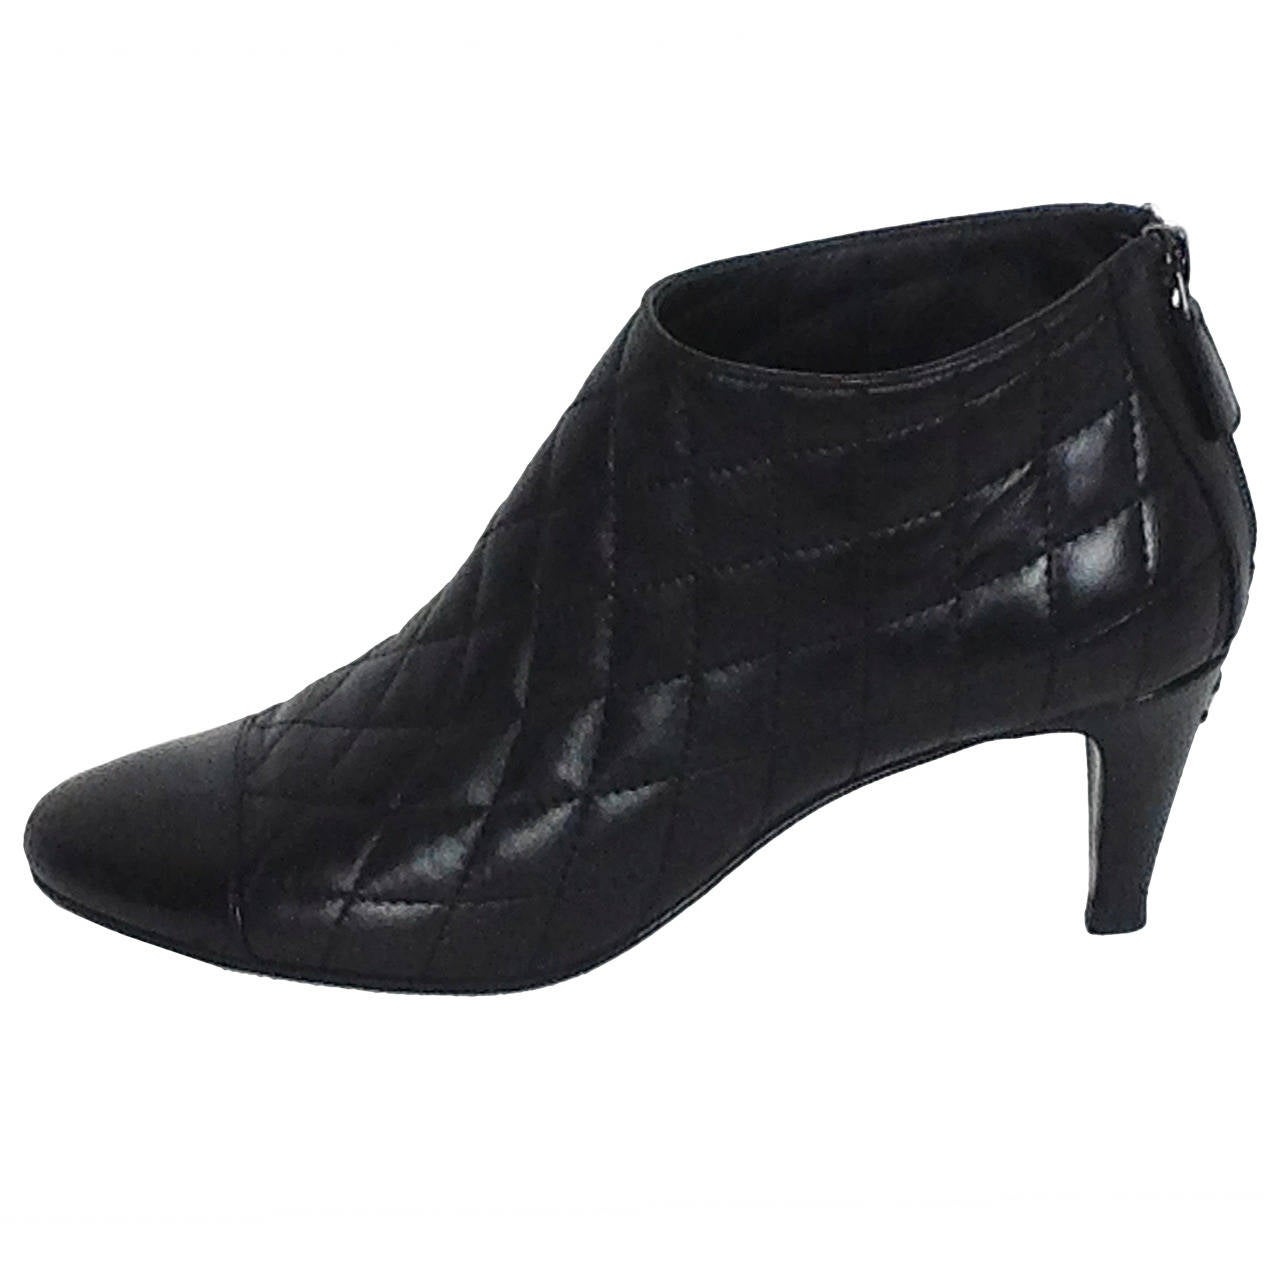 This season Chanel quilted ankle boots      size 39